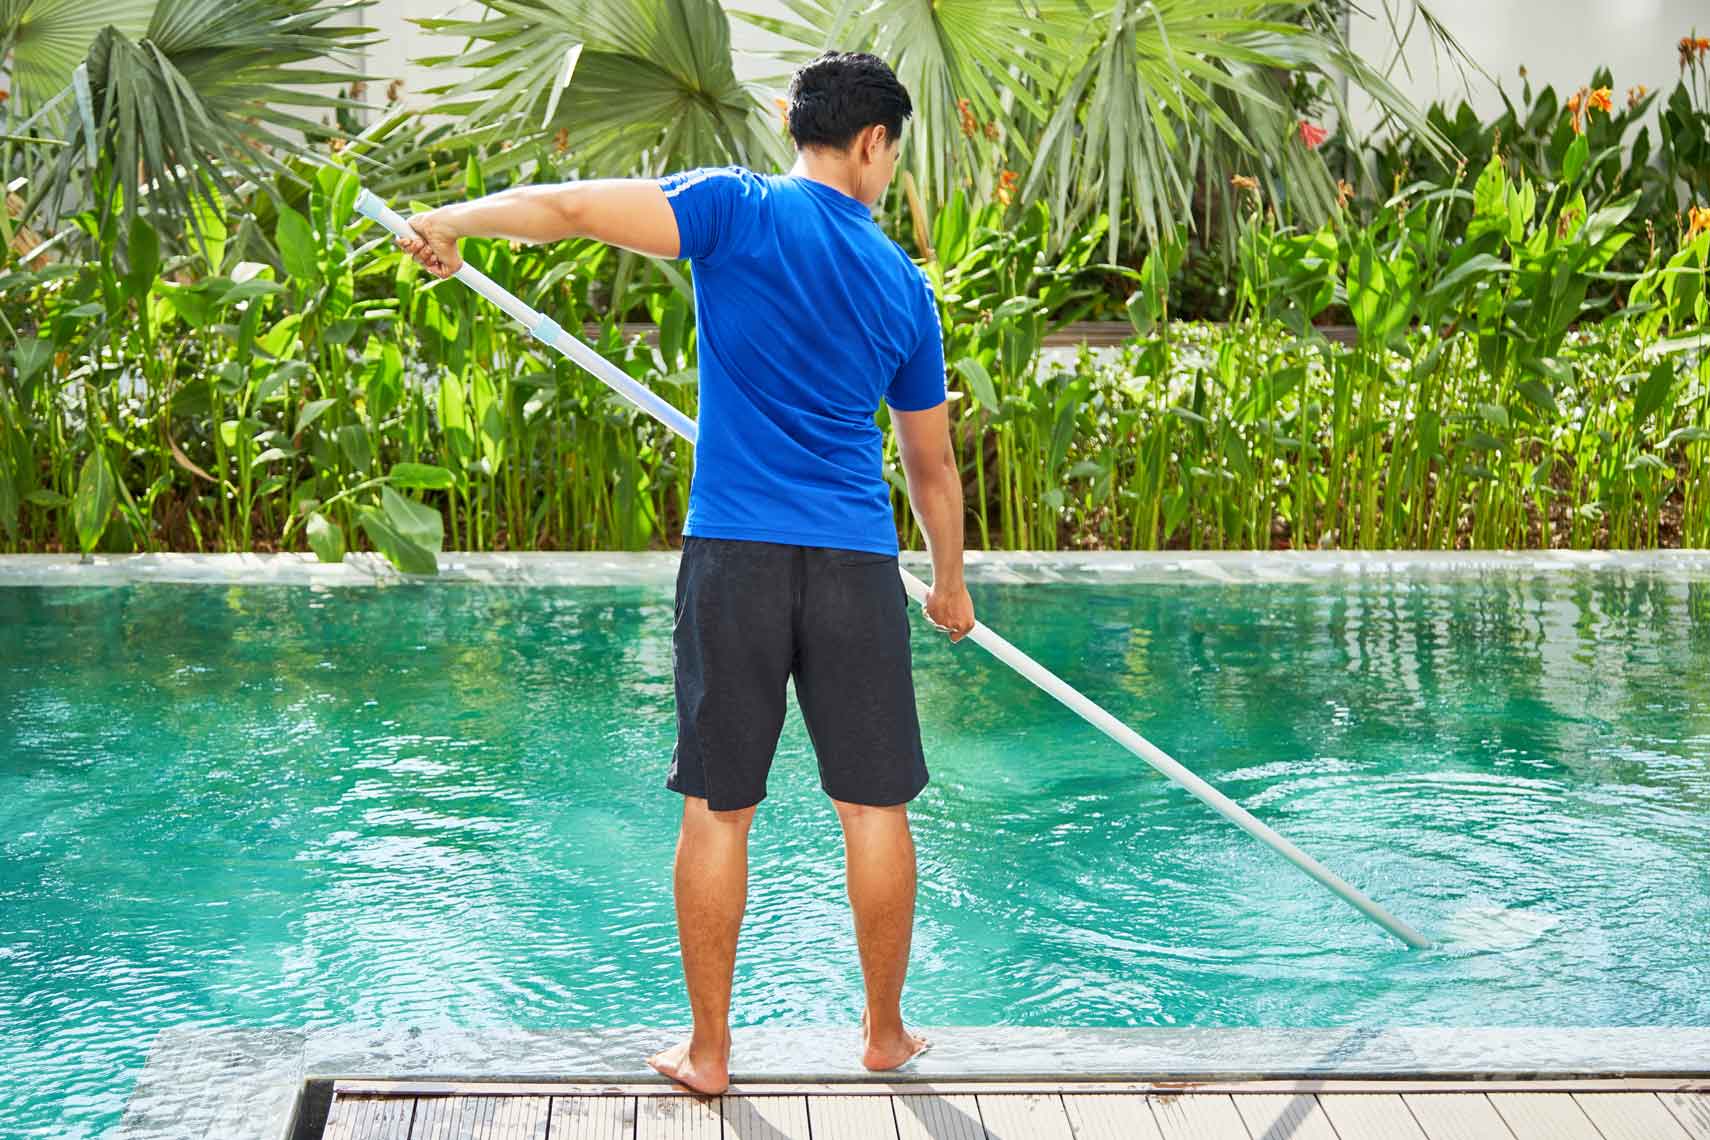 young-man-cleaning-pool-e1628821970333.jpg